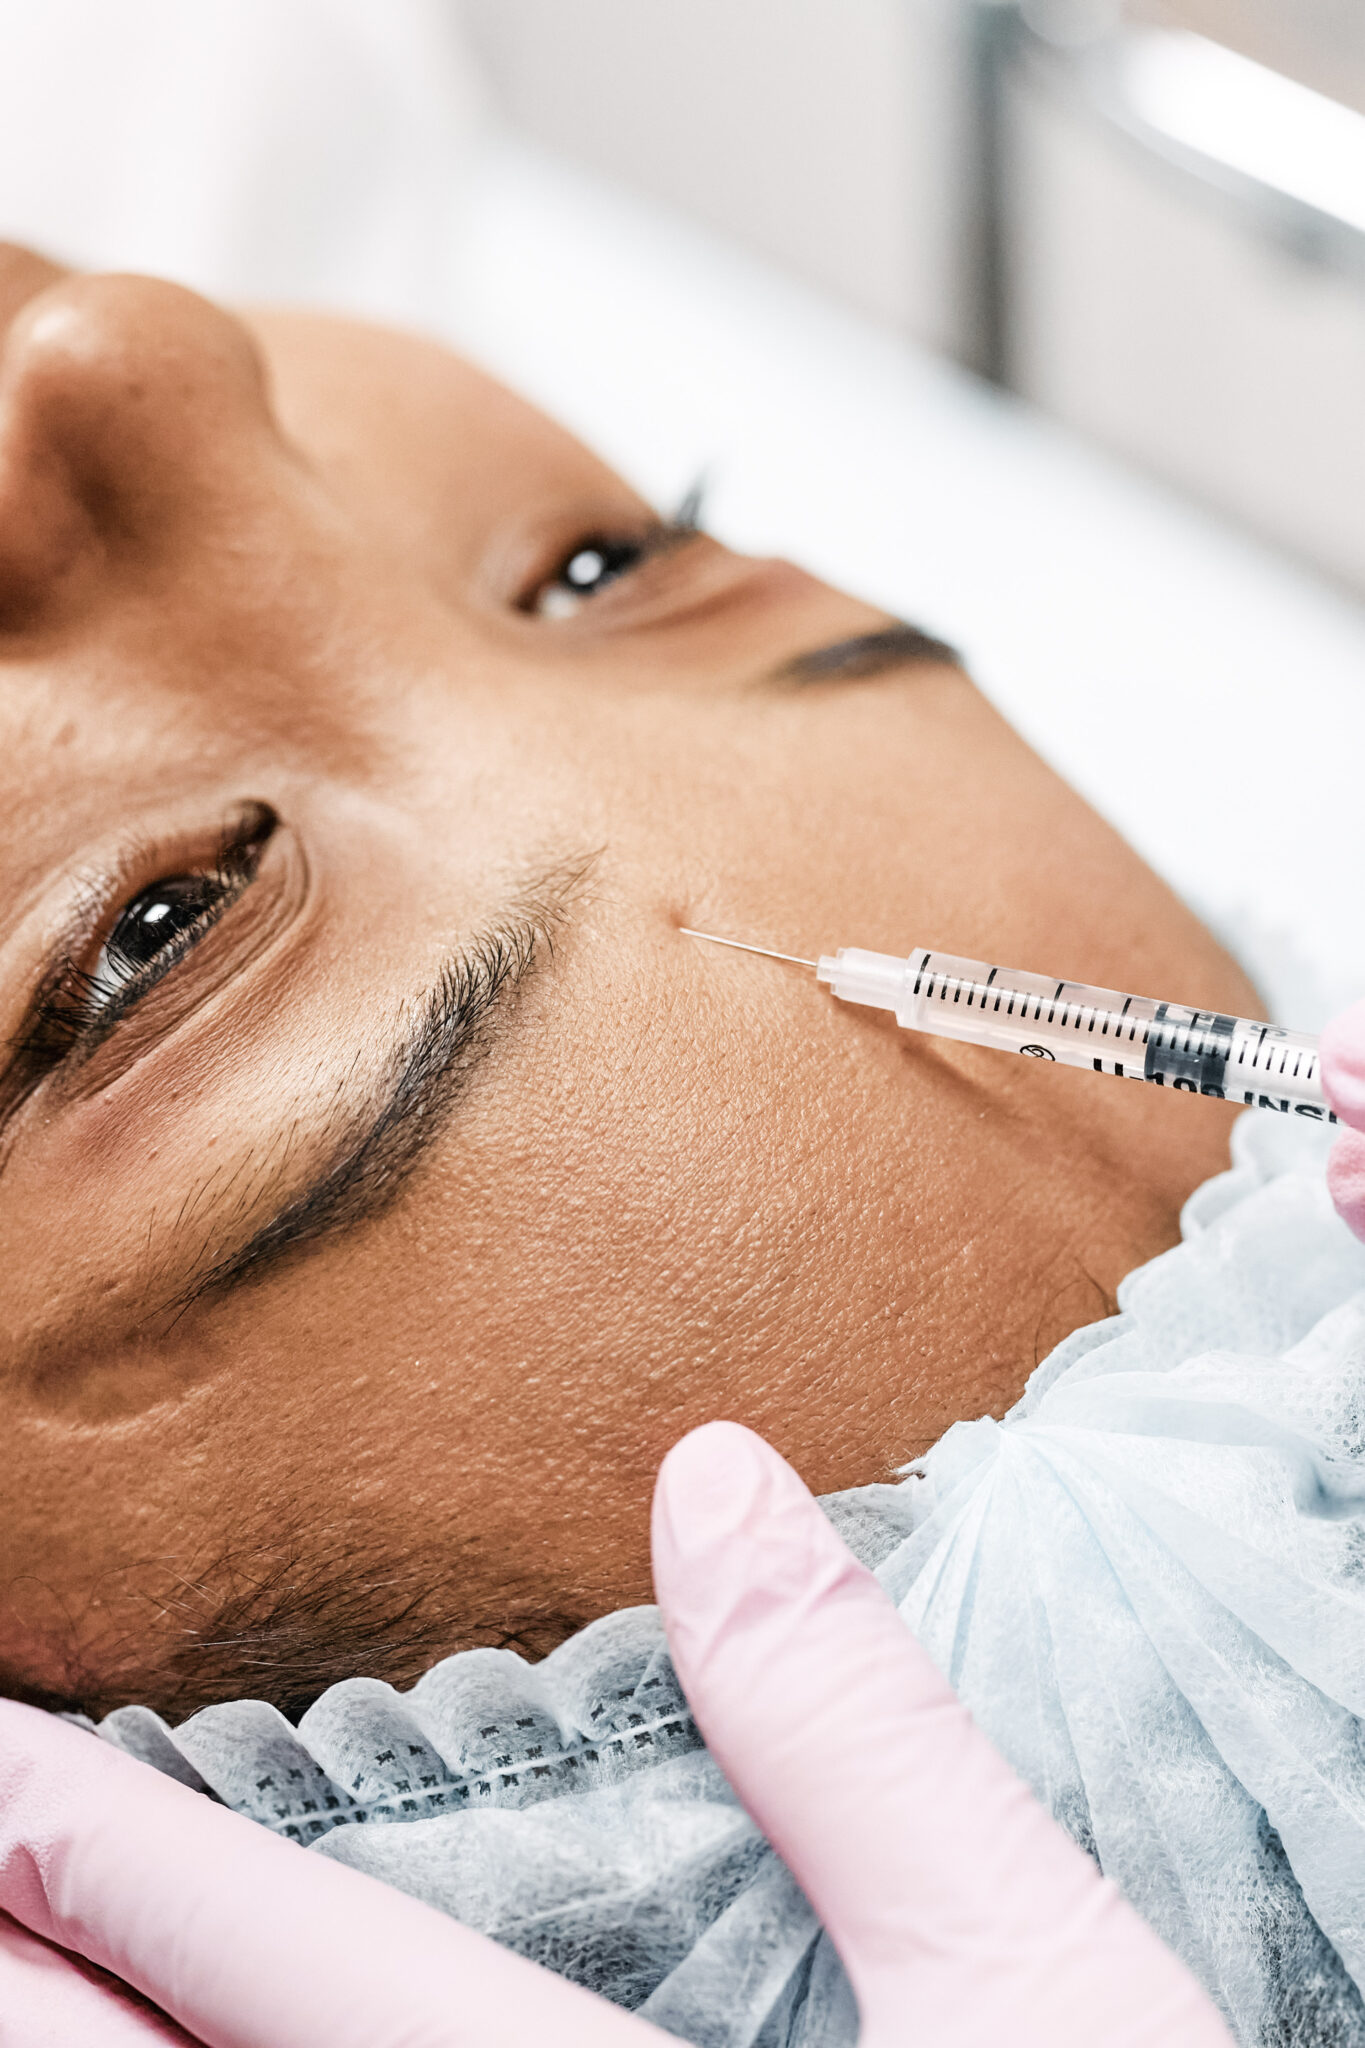 A professional is adding botox to a woman's forehead. This article covers the topic of Botox vs Fillers, what do you need?